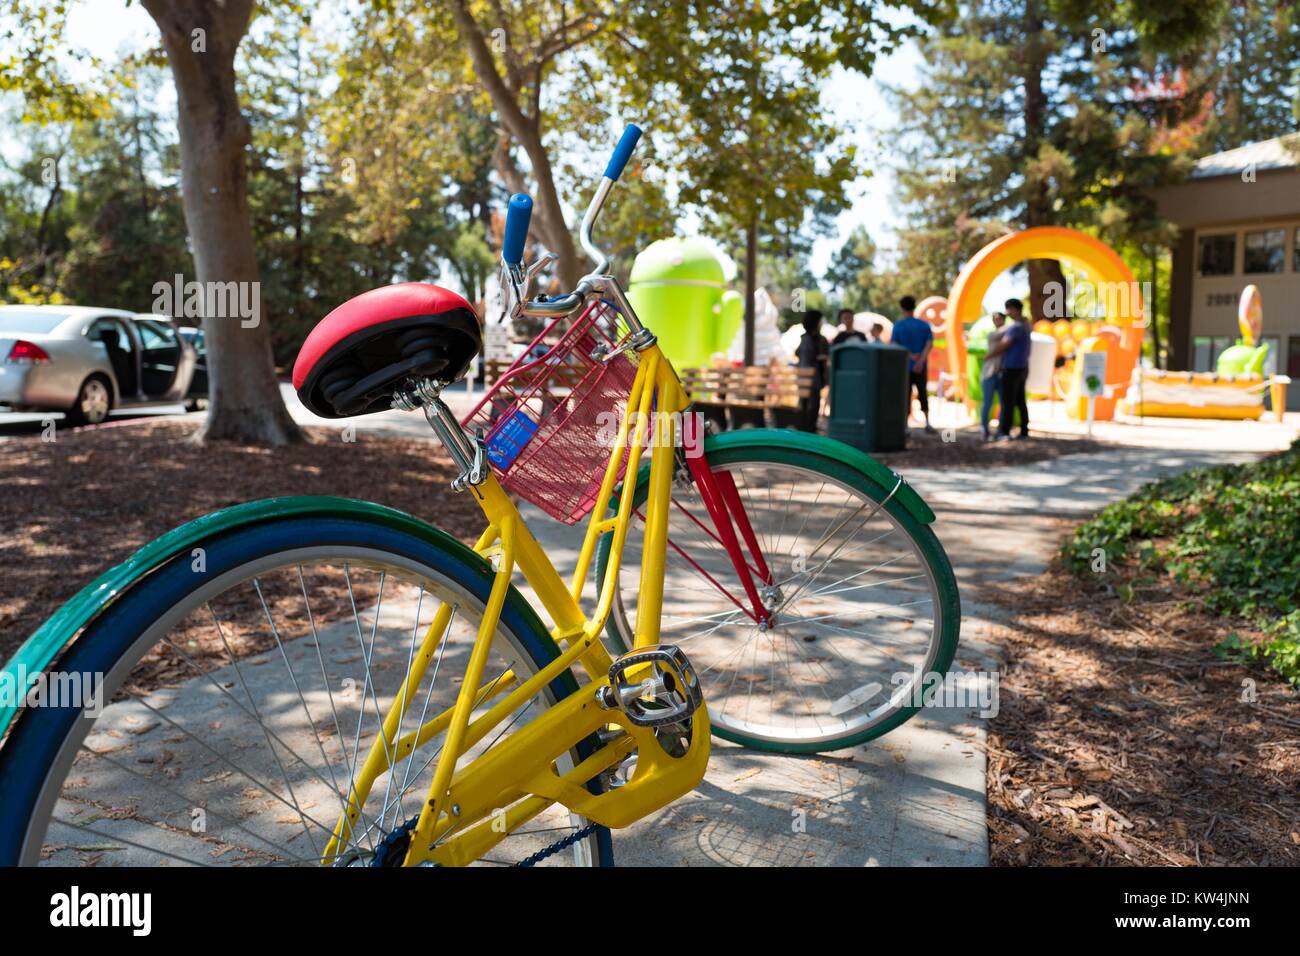 Colorful Google Bike parked in front of the Android Sculpture Park at the Googleplex, headquarters of the search engine company Google in the Silicon Valley town of Mountain View, California, August 24, 2016. Employees are encouraged to ride the free bikes around Google's campus, and to leave them in front of Google buildings once they arrive at their destination, Mountain View, California. Stock Photo